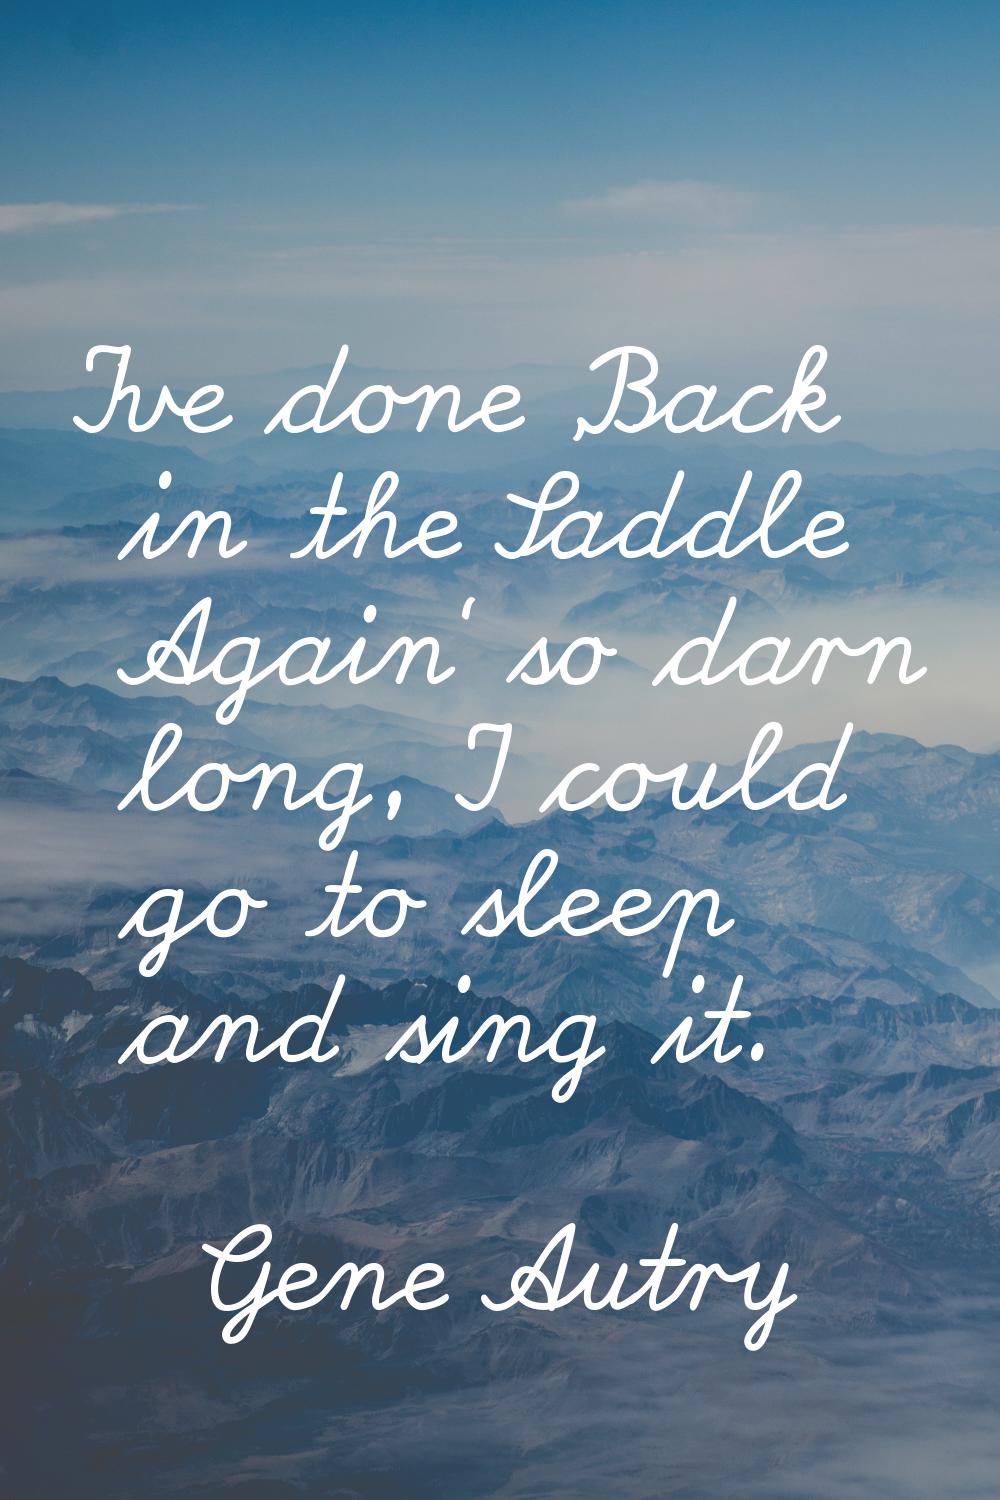 I've done 'Back in the Saddle Again' so darn long, I could go to sleep and sing it.